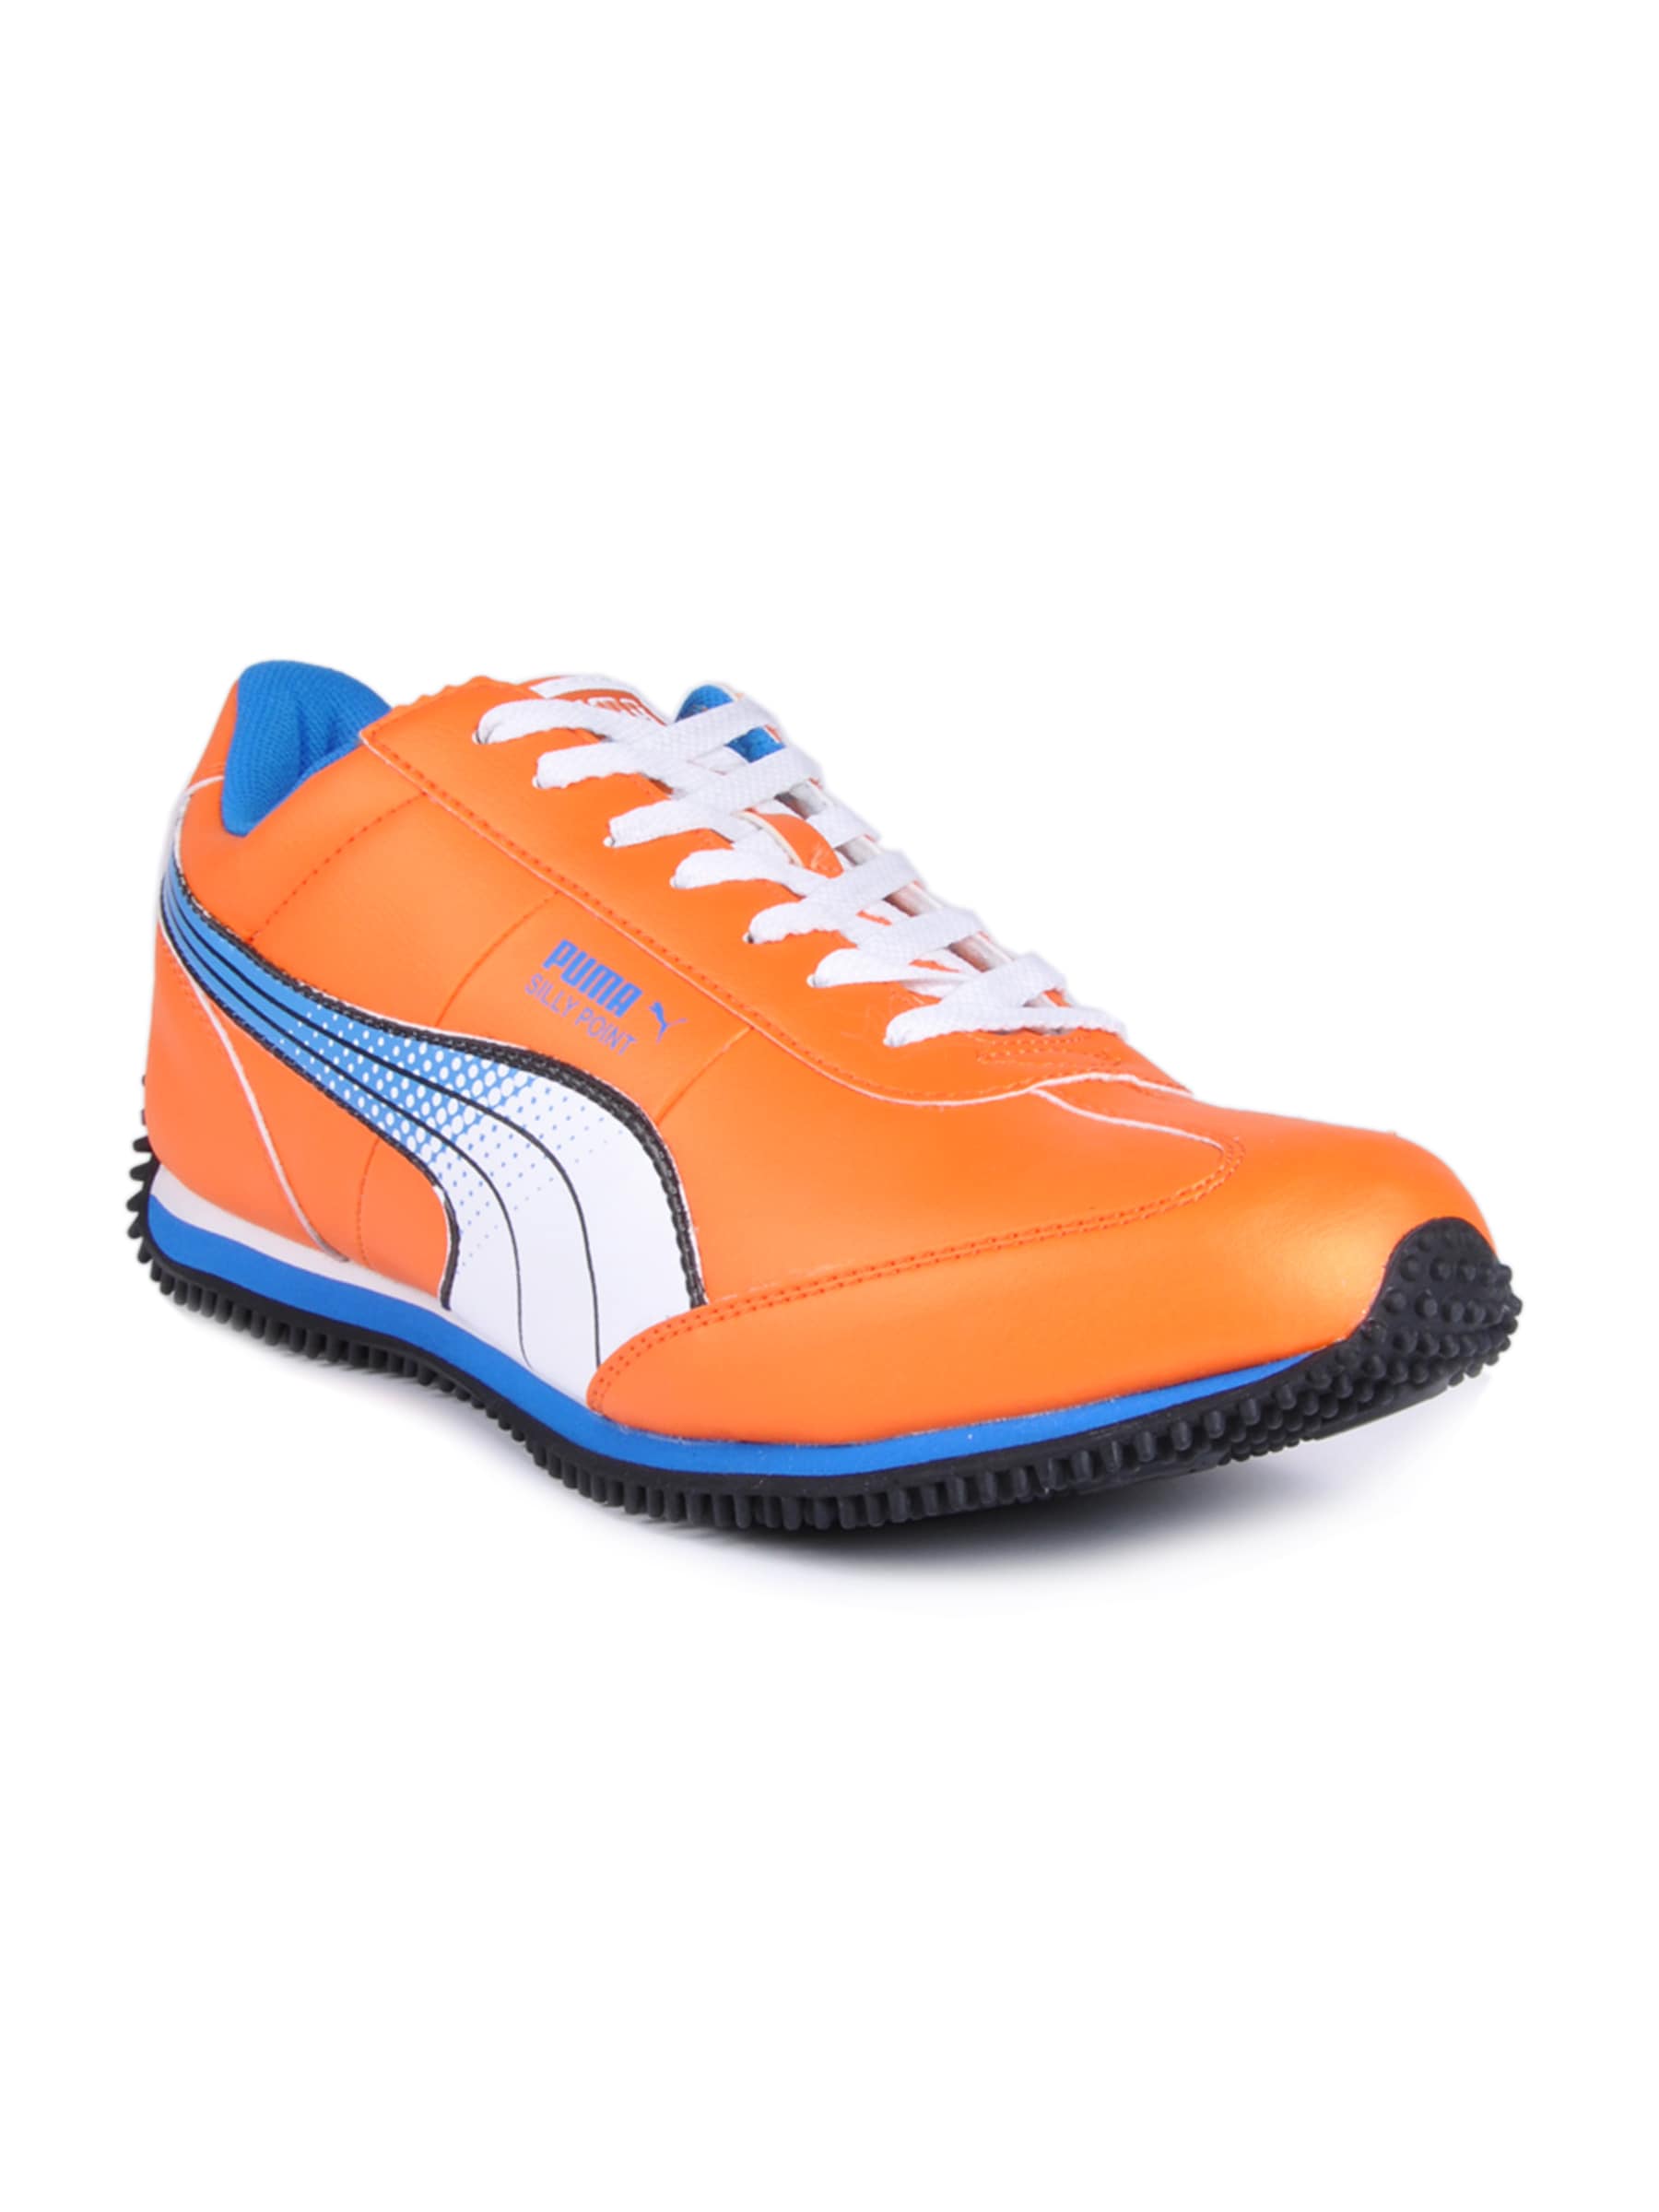 Puma Men Silly Point Orange Casual Shoes